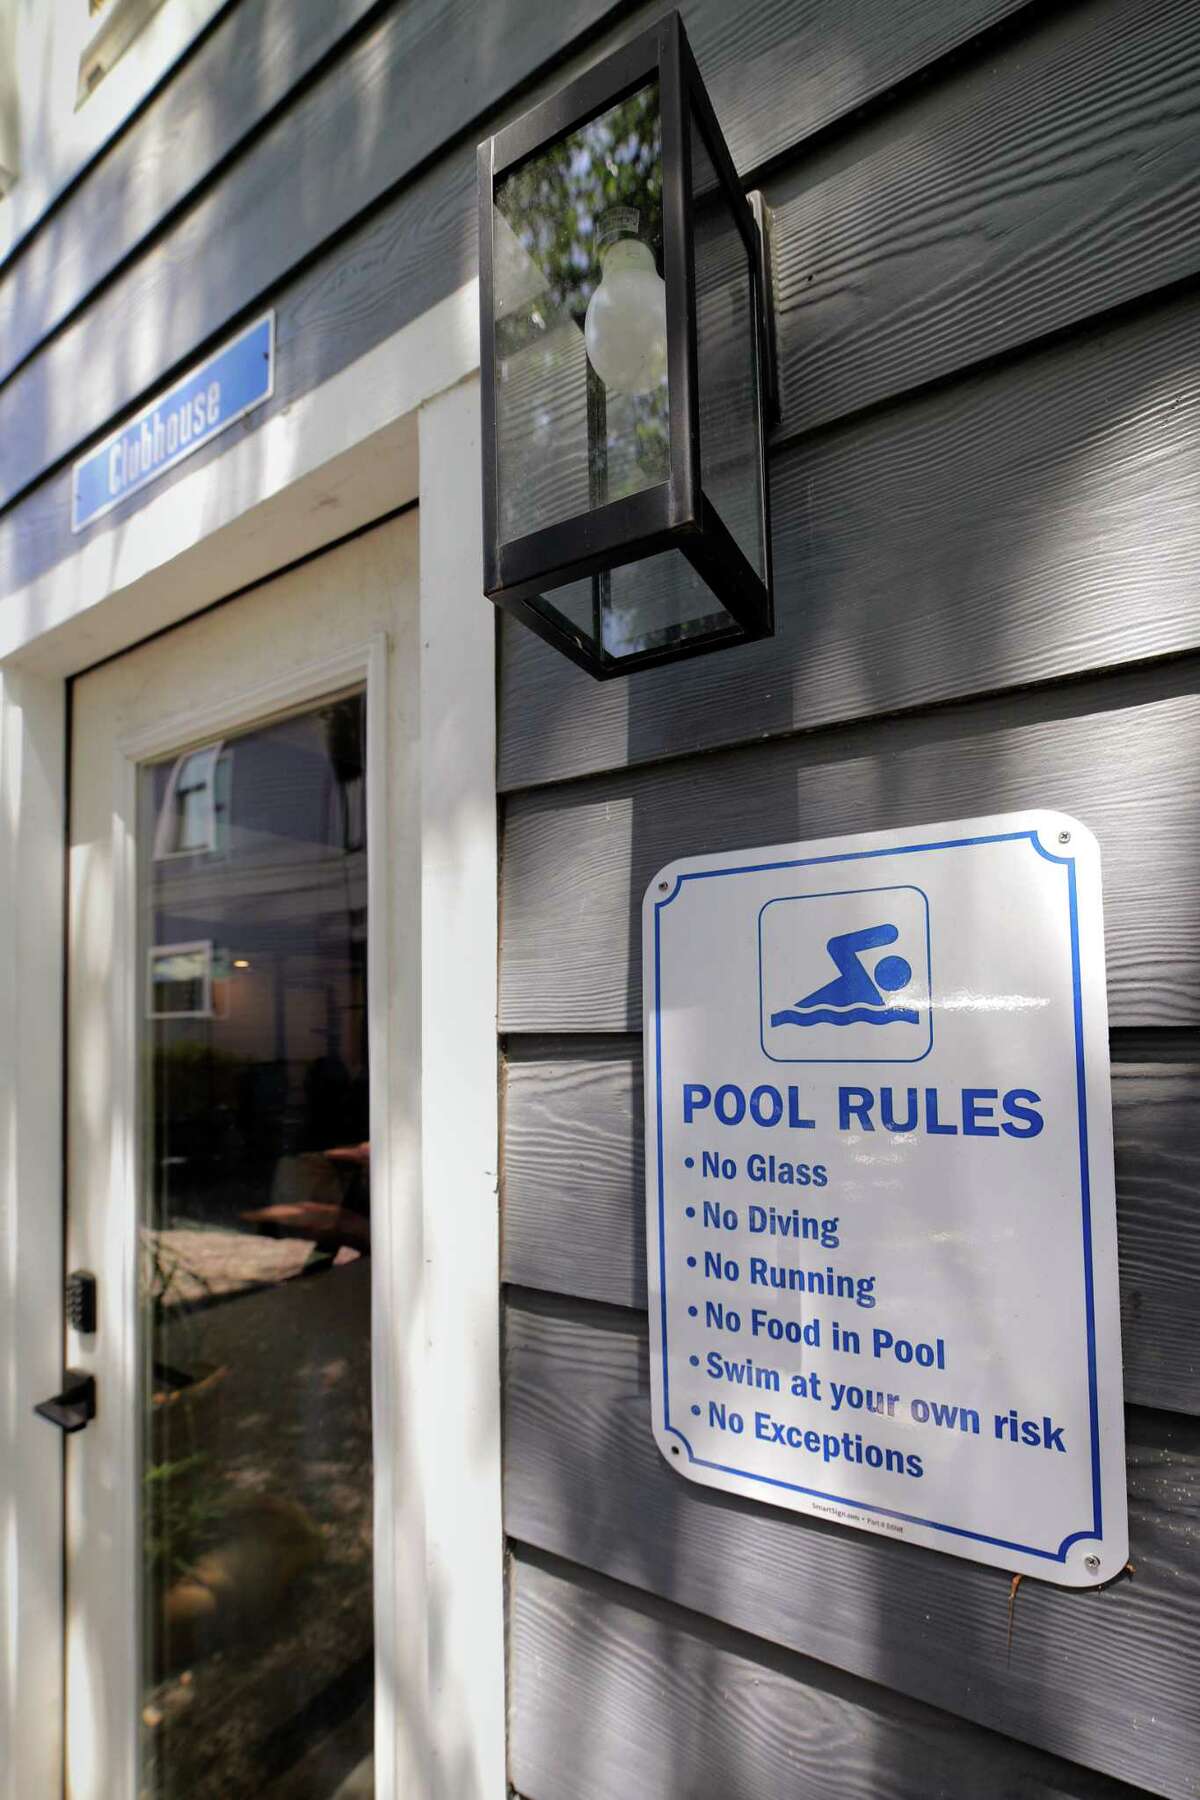 Swimply side hustler near Portland made $195,000 renting out his pool